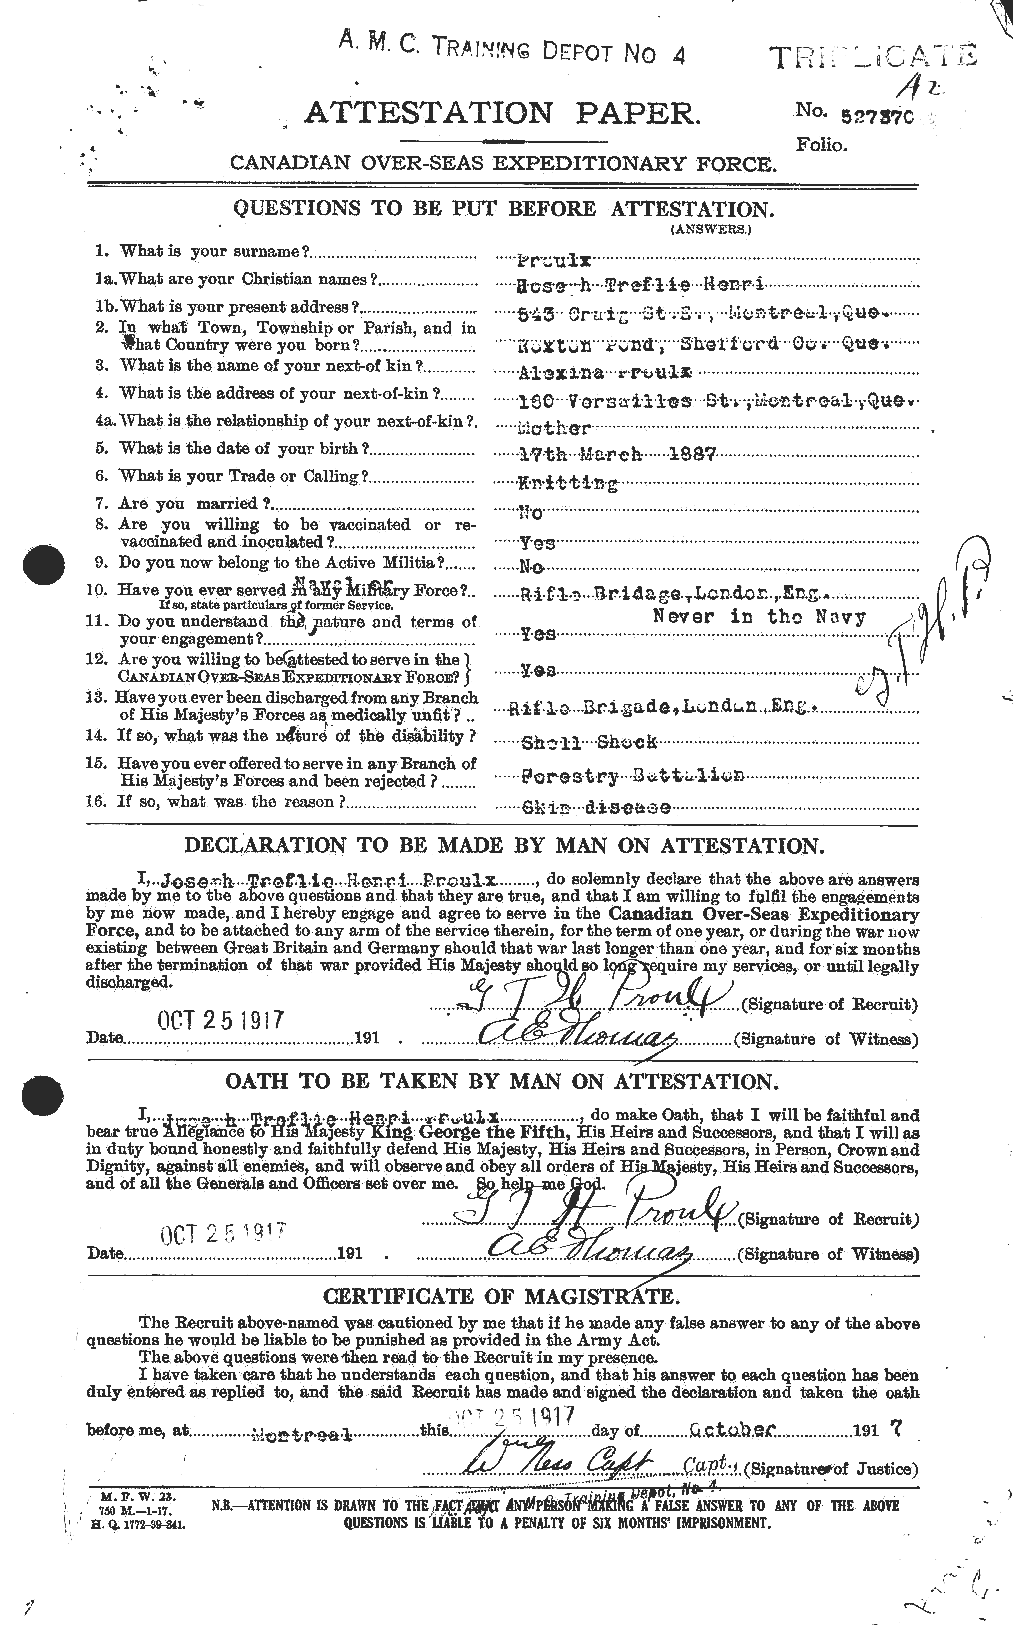 Personnel Records of the First World War - CEF 587593a